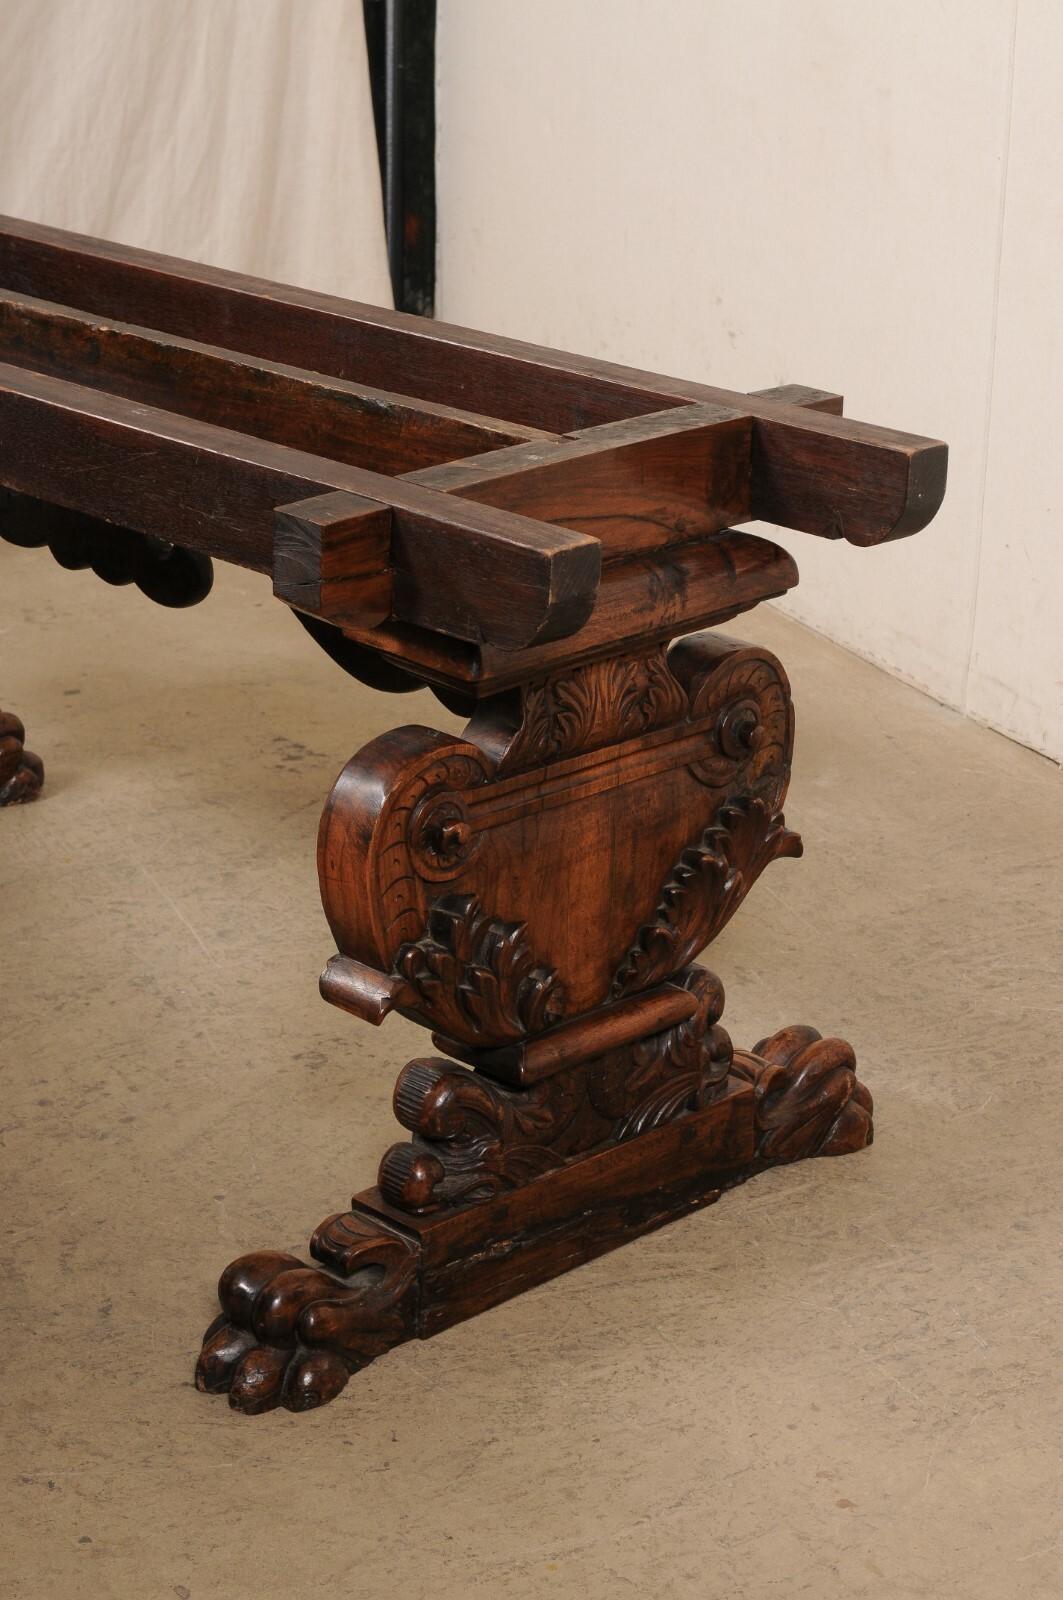 Wood A Gorgeous 18th C Italian Inlaid Marble Top Table w/Robustly Carved Trestle Legs For Sale